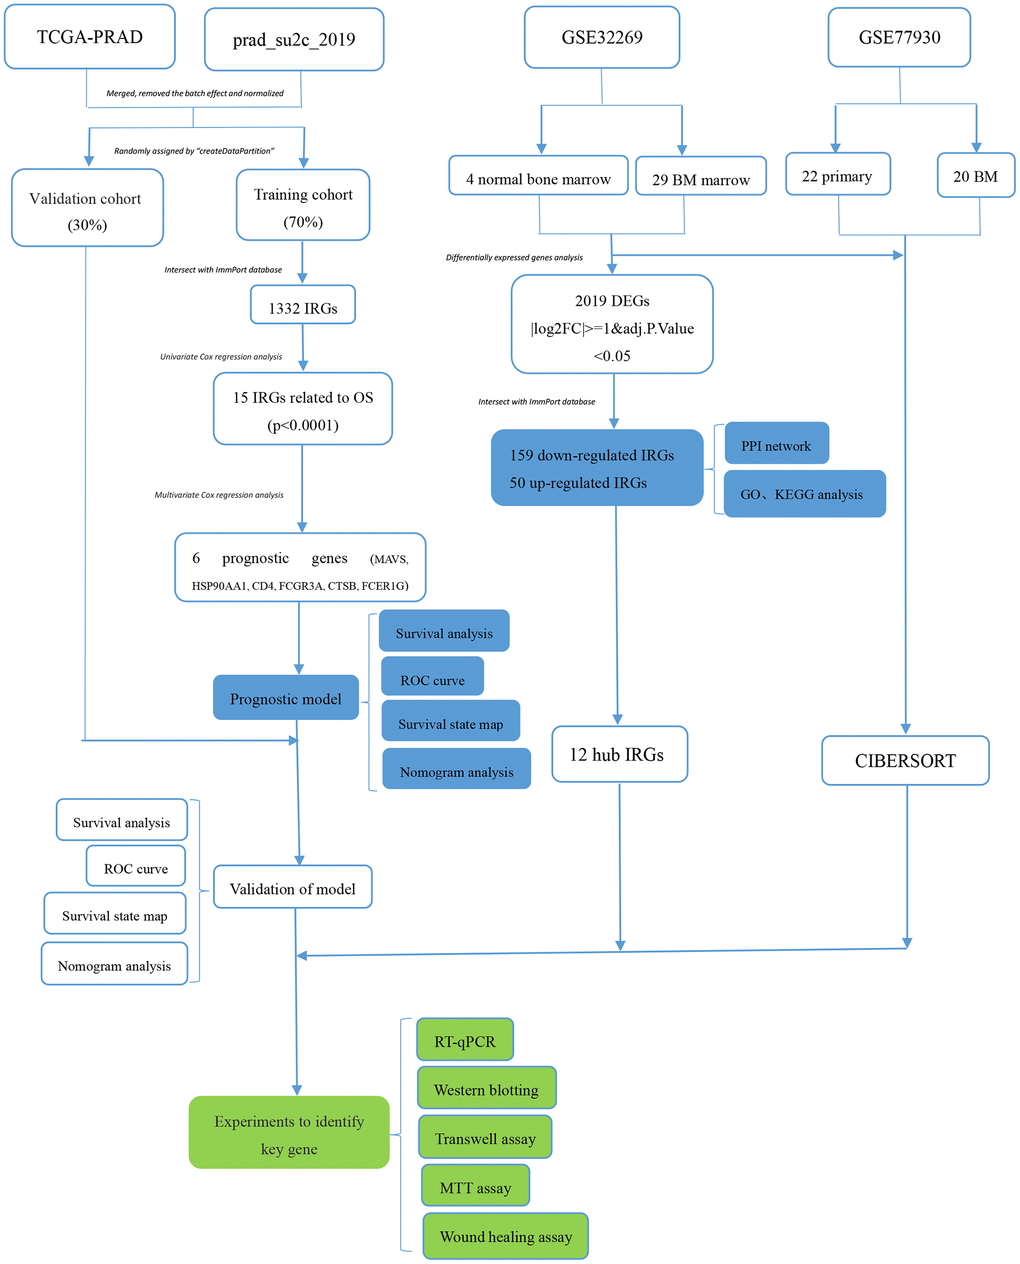 The working flow chart of this study. IRGs, immune-related genes; DEGs, differentially expressed genes; FC, fold change, BM, bone metastases; TCGA, The Cancer Genome Atlas; OS, overall survival; ROC, receiver operating characteristic; RT-qPCR, Real-time quantitative Polymerase Chain Reaction.